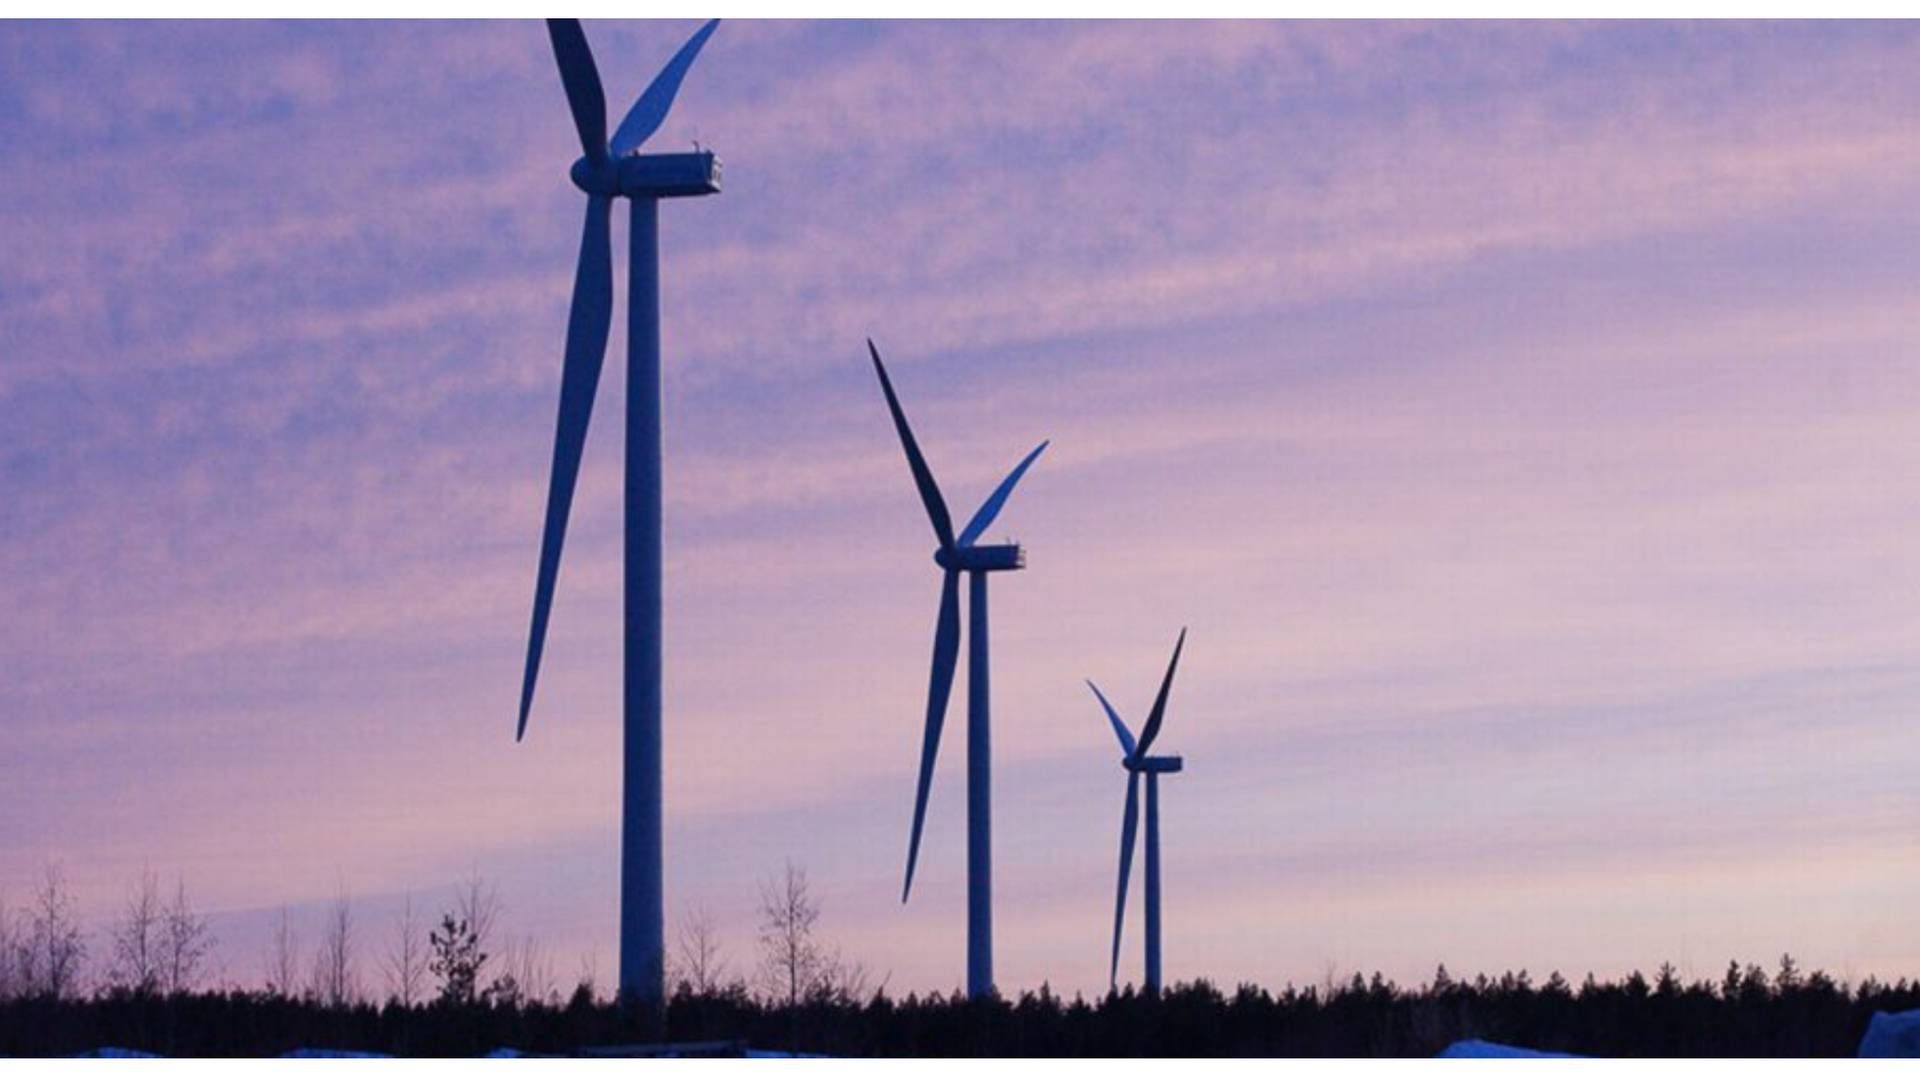 Finland is expected to become energy self-sufficient within two years by increasing domestic production especially in nuclear and wind power. | Photo: PR Exilion.